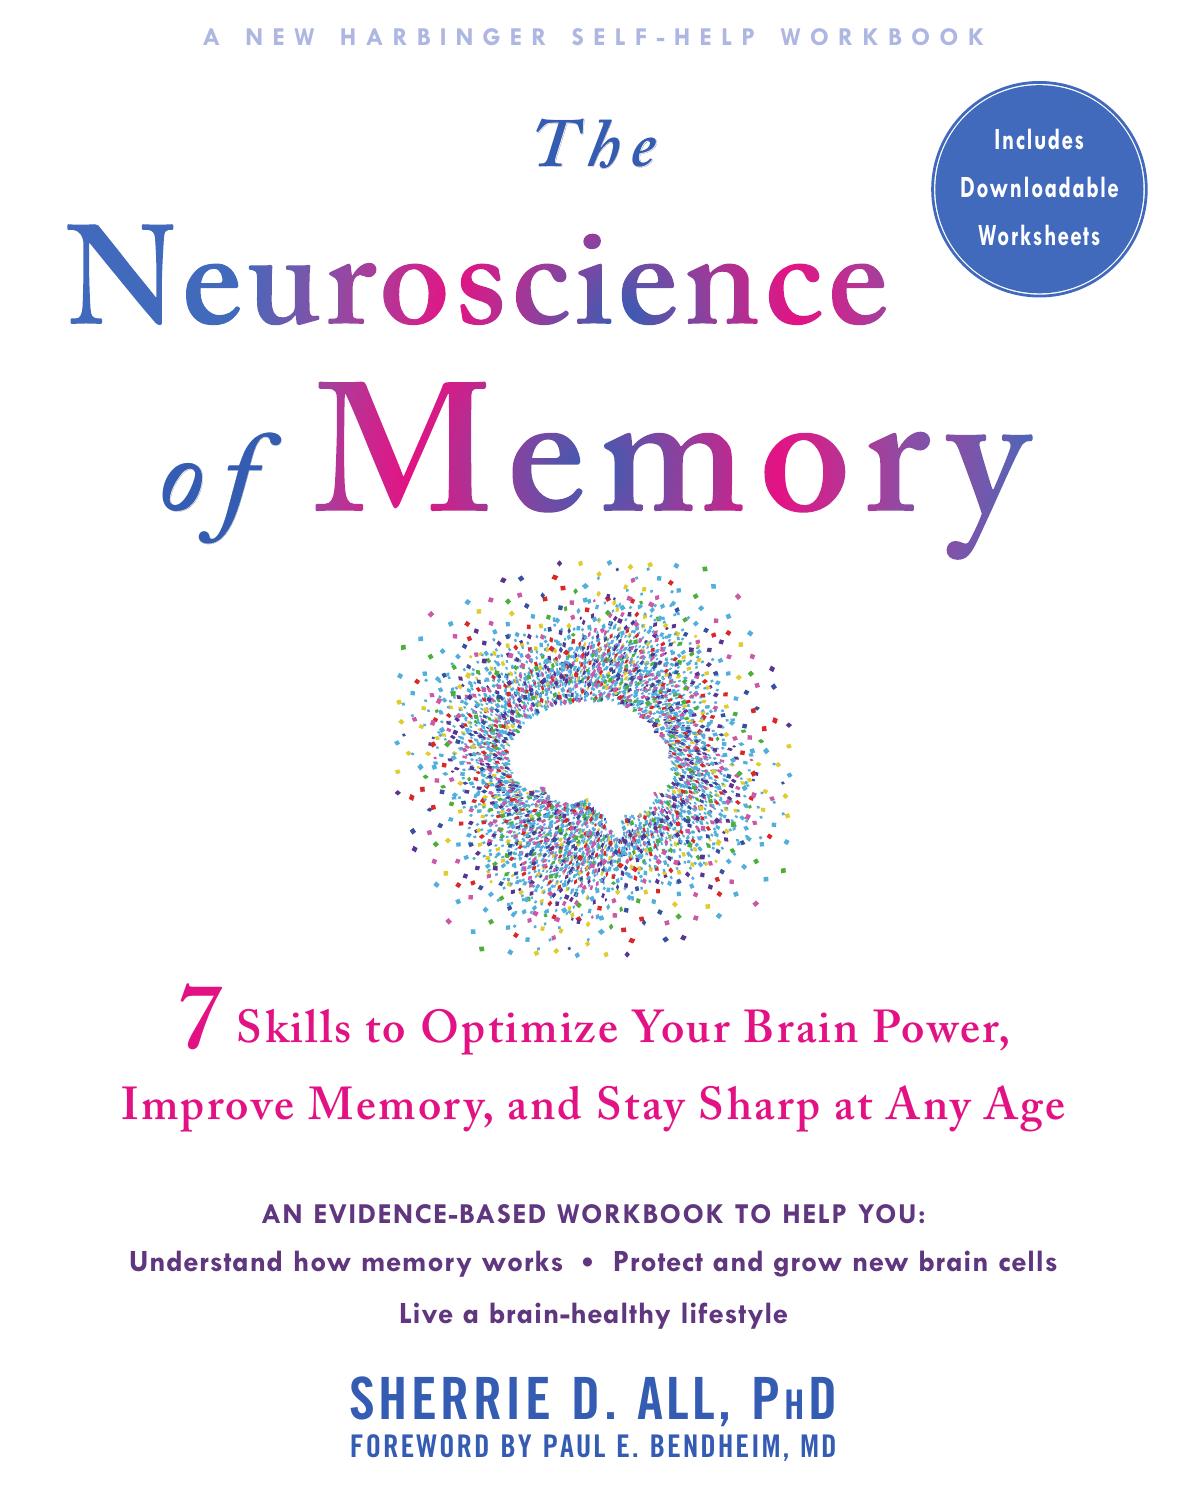 The Neuroscience of Memory by Sherrie D. All